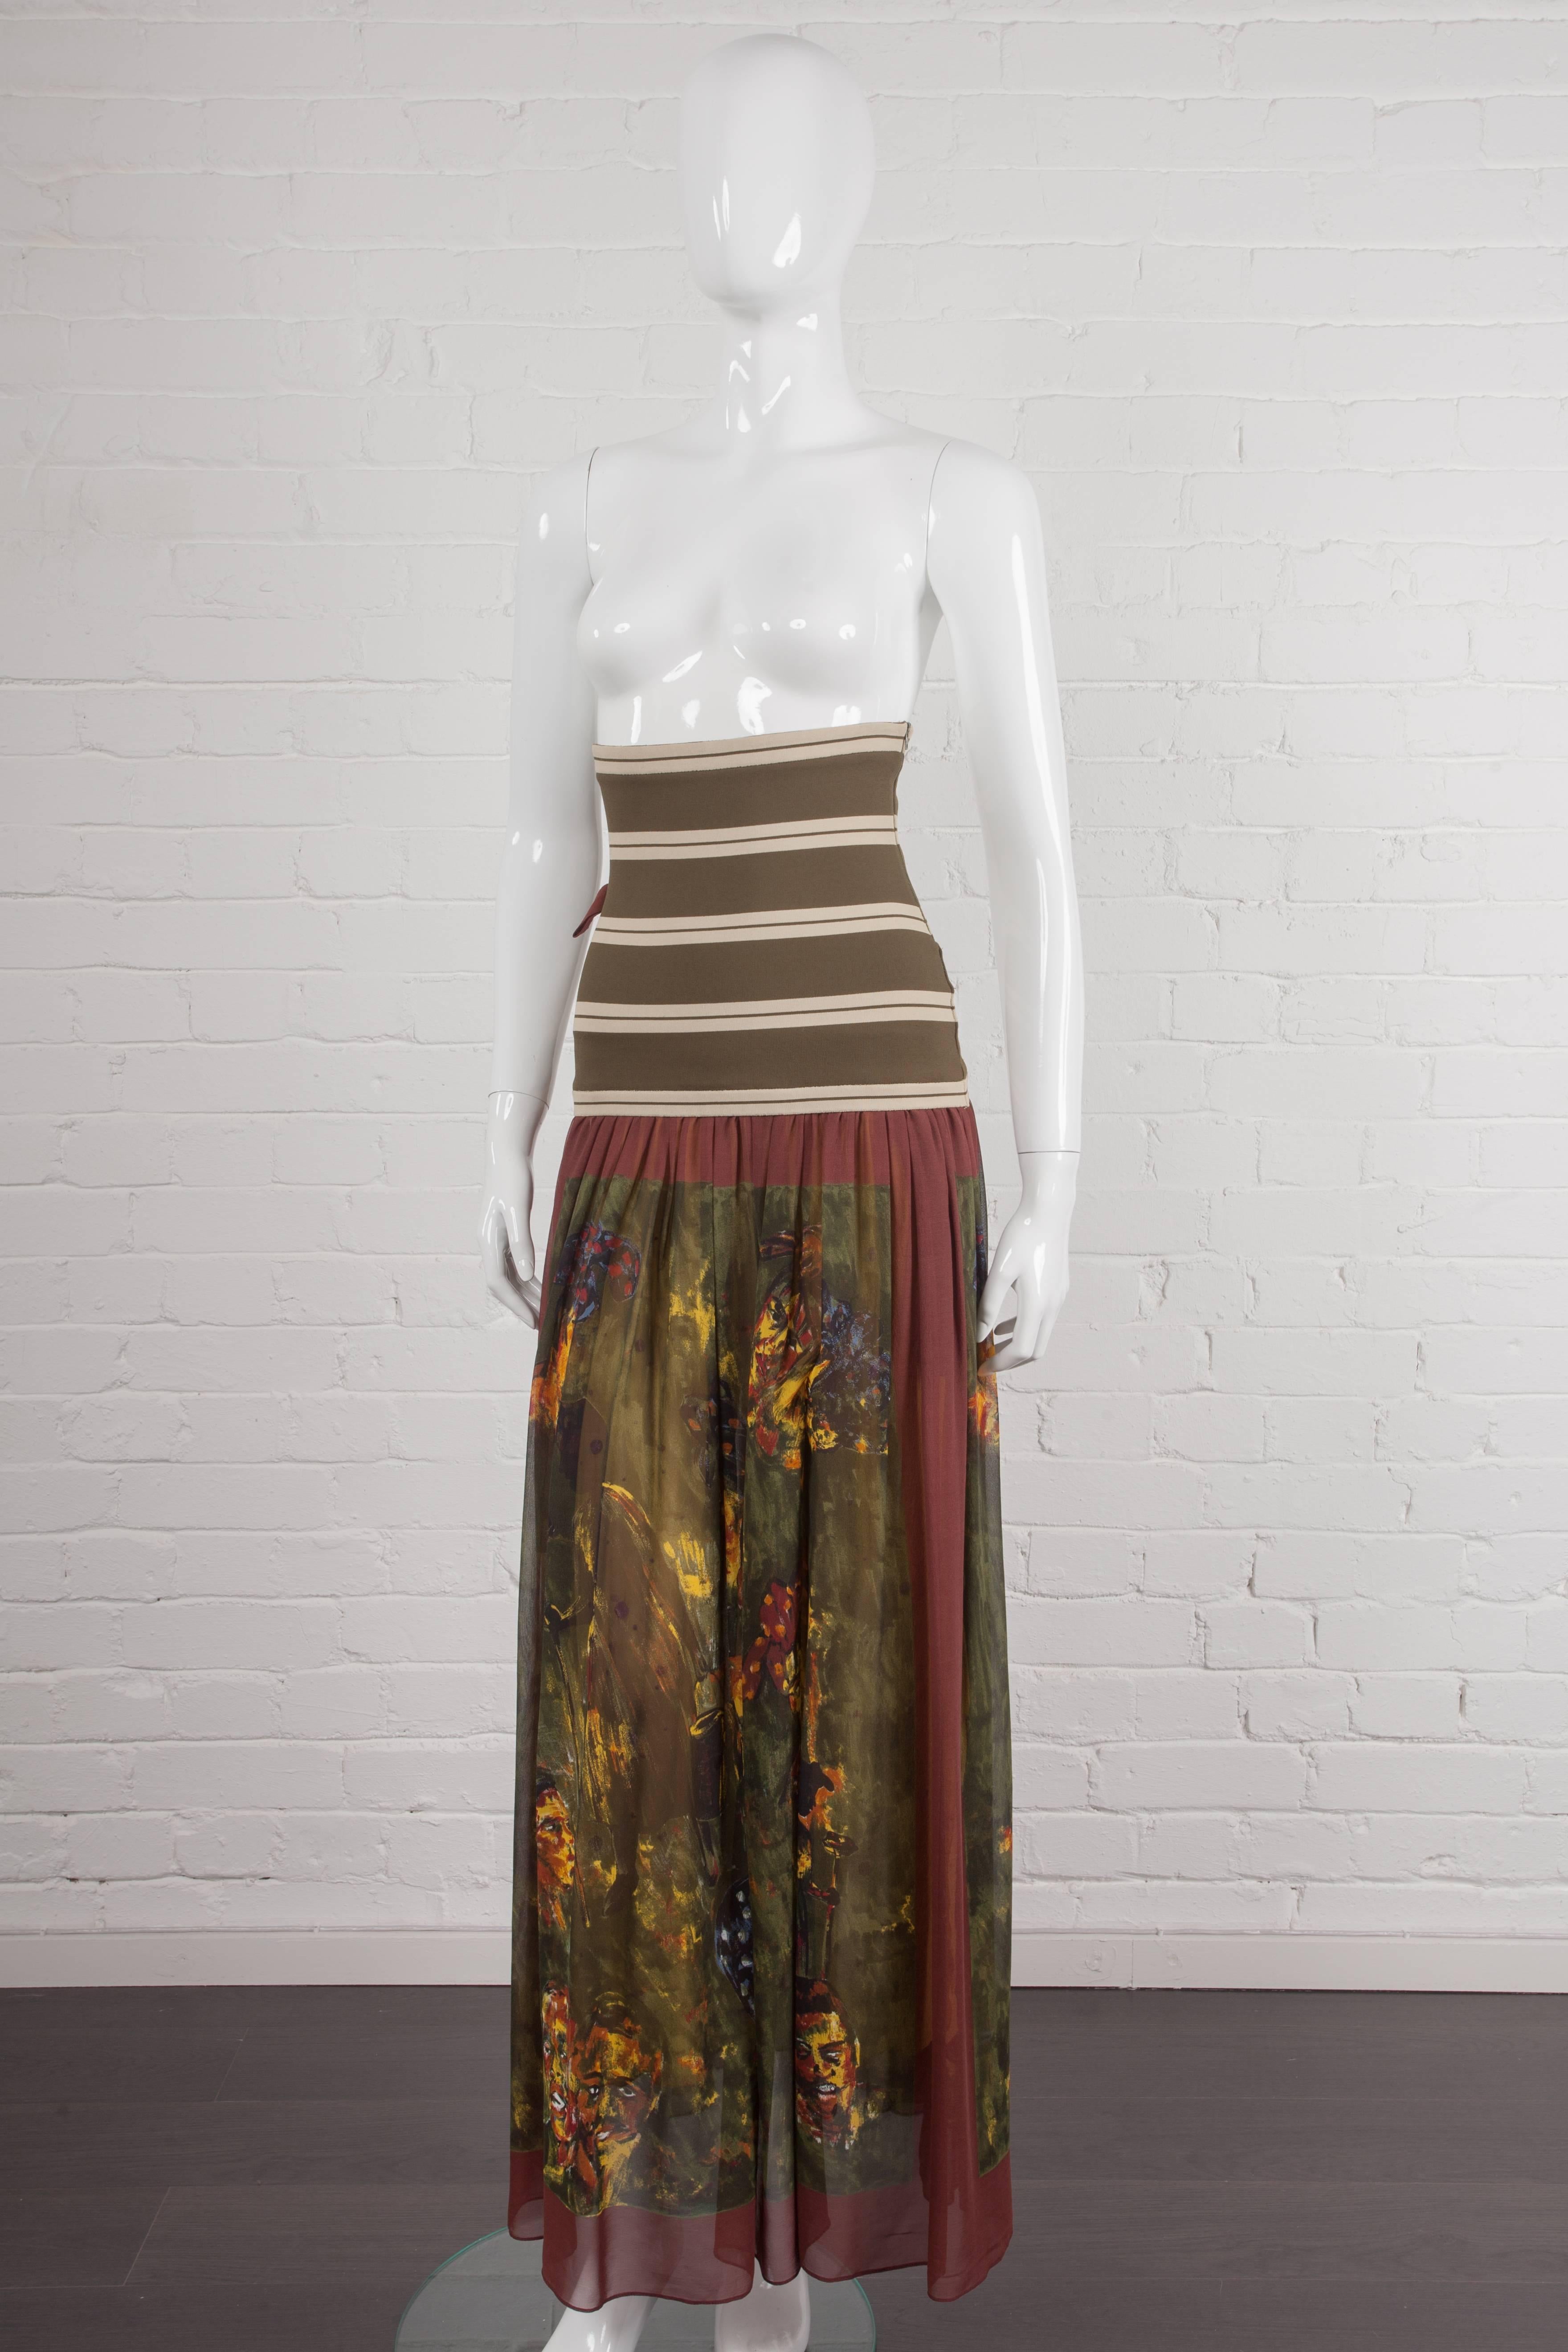 One-piece long skirt in silk viscose with attached boob tube in polyamide elastane. From the 1988 Spring/Summer “The Concierge in the Staircase” Collection. Semi-transparent at the back, the skirt features a second layer to the front in silk viscose